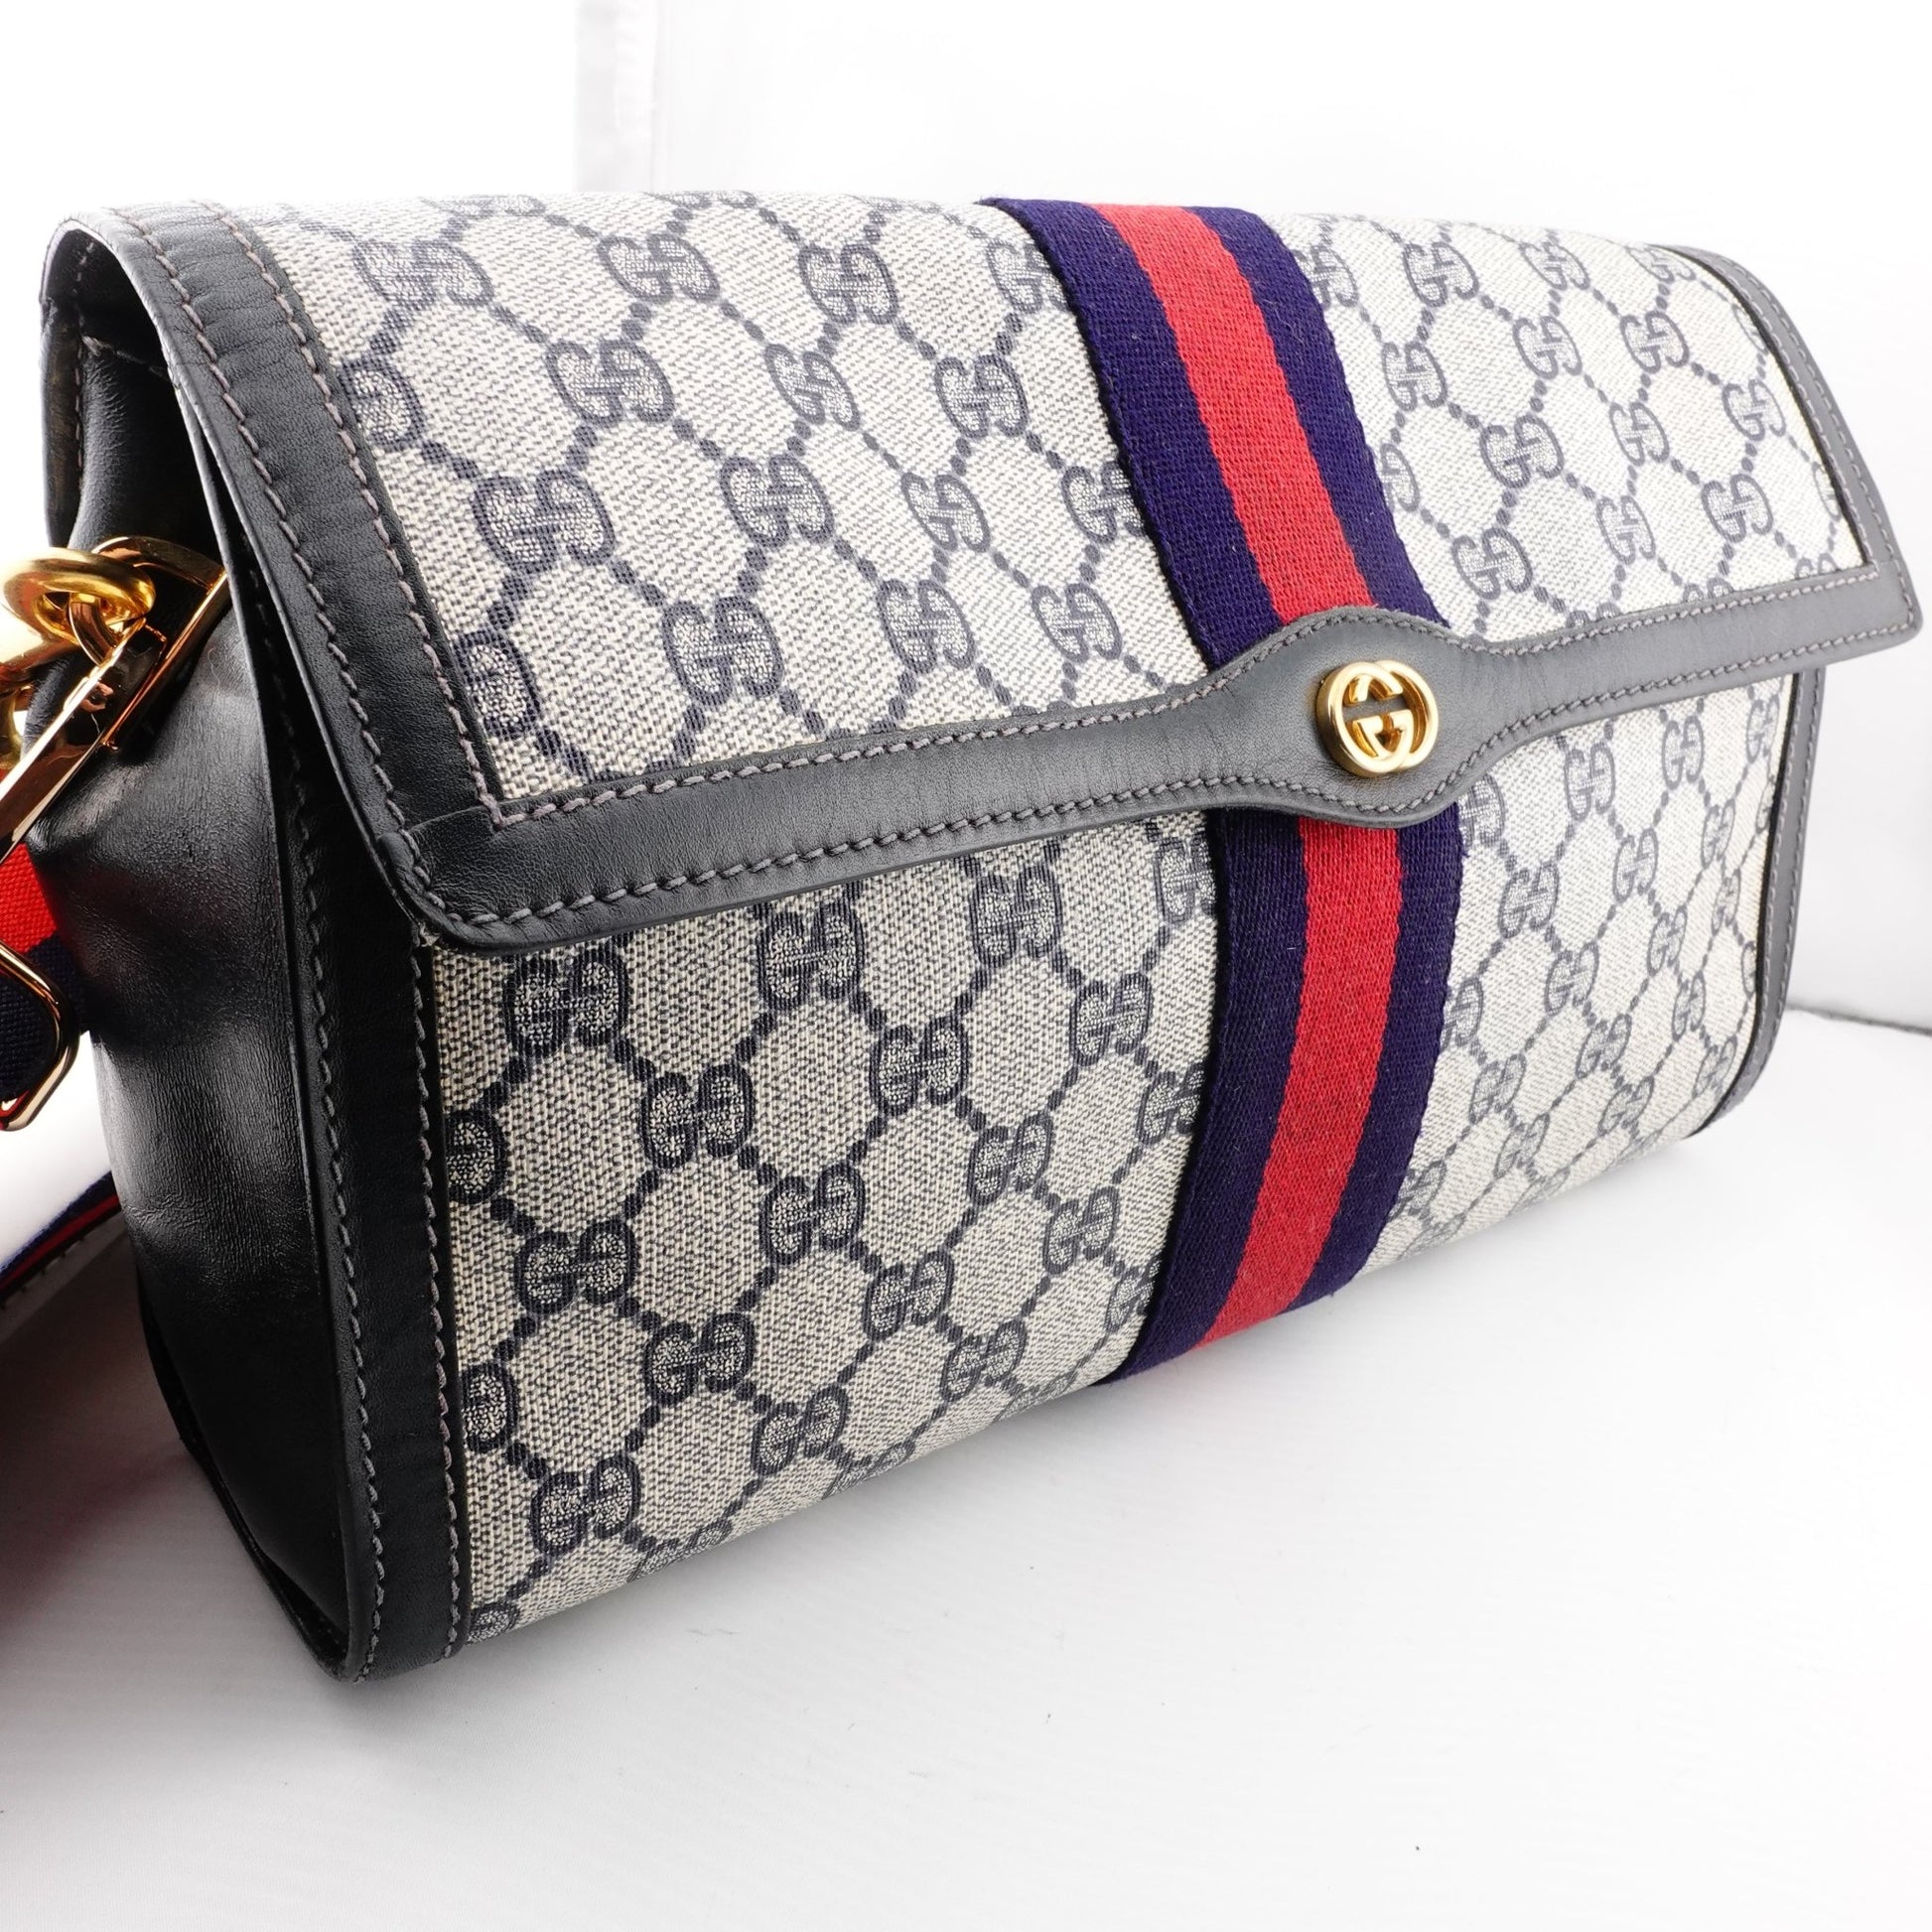 GUCCI Large GG Supreme Ophidia Clutch with Strap & Chain - Bag Envy